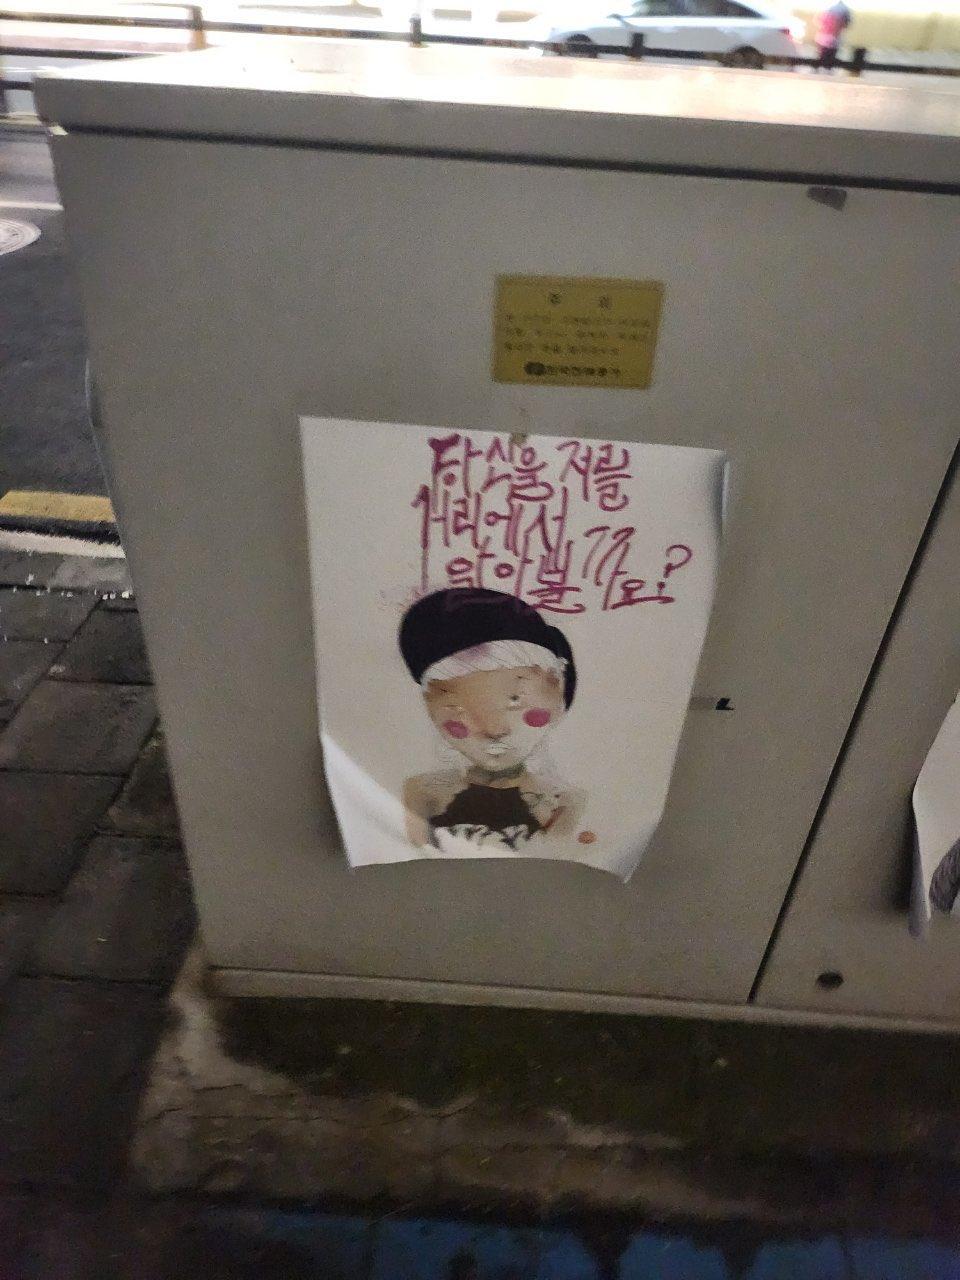 The mysterious posters that are being captured all over Jeju Island